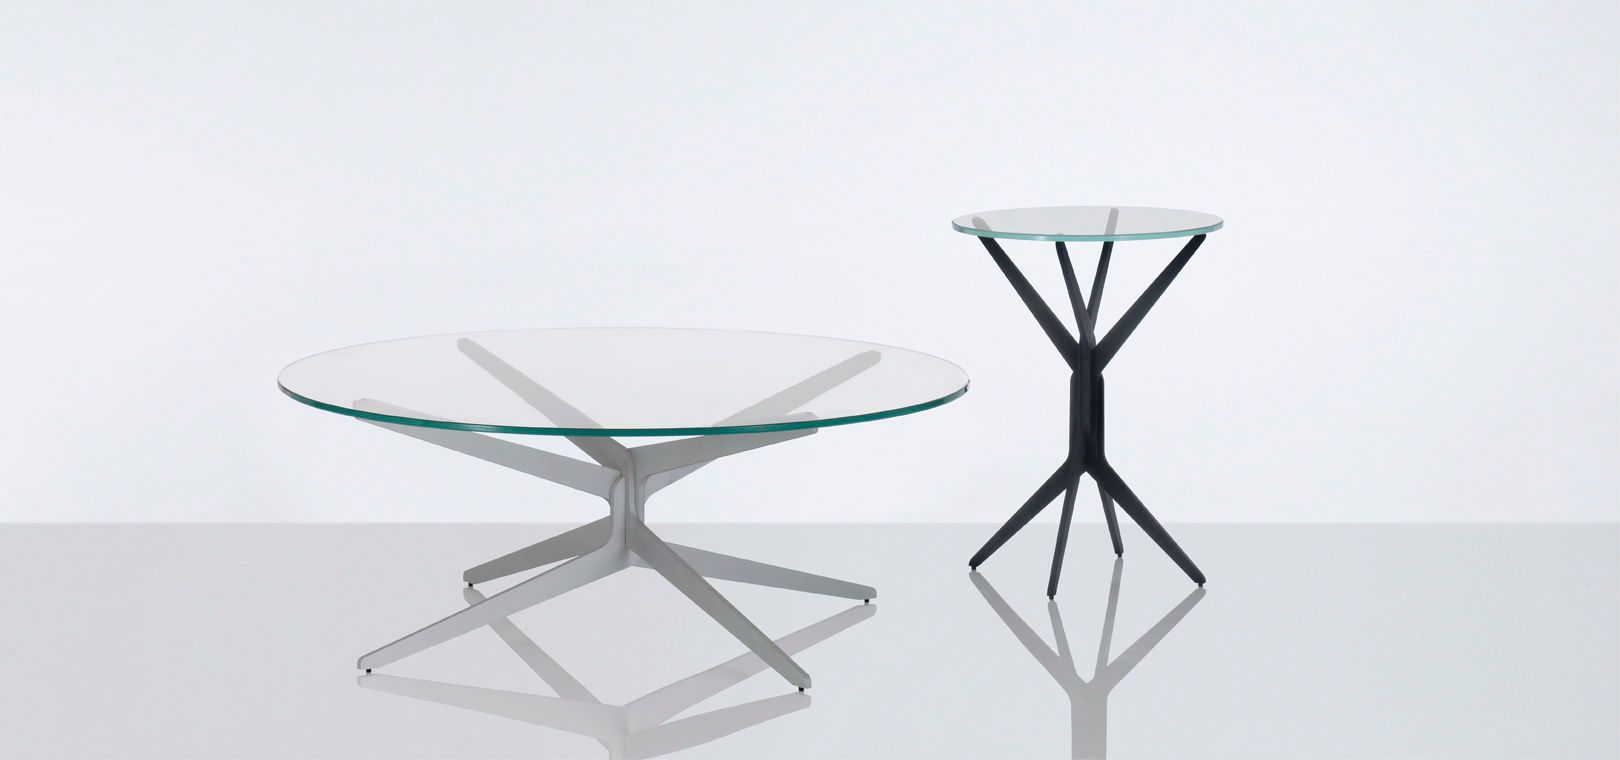 Coffee Table With Ottomans Made By Compressure Molding Was Founded In 1983 With The Aim Glass For Coffee Table Of Increasing The Interest For This Technique (View 7 of 10)